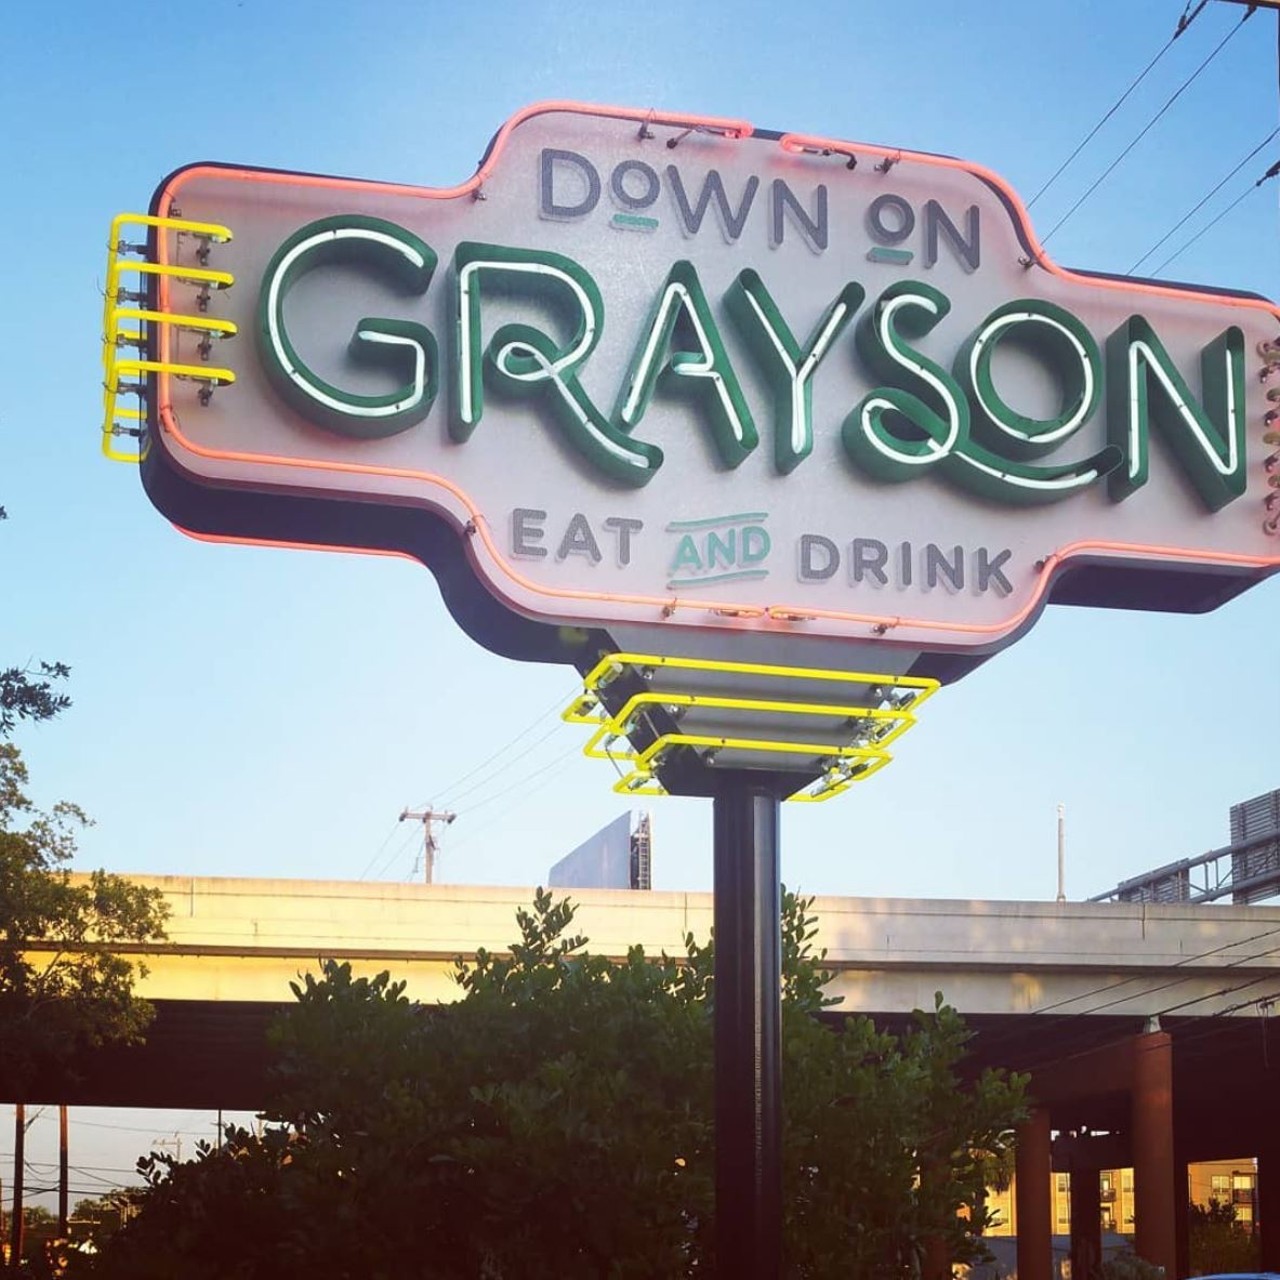 Down on Grayson
303 E Grayson St, (210) 248-9244, downongrayson.com
Located near the Pearl, Down on Grayson is a slightly-more upscale American food restaurant with a huge patio dining area under the shade of an oak tree. Have your wine and drink it too, right? 
Photo via Instagram / kafergie77